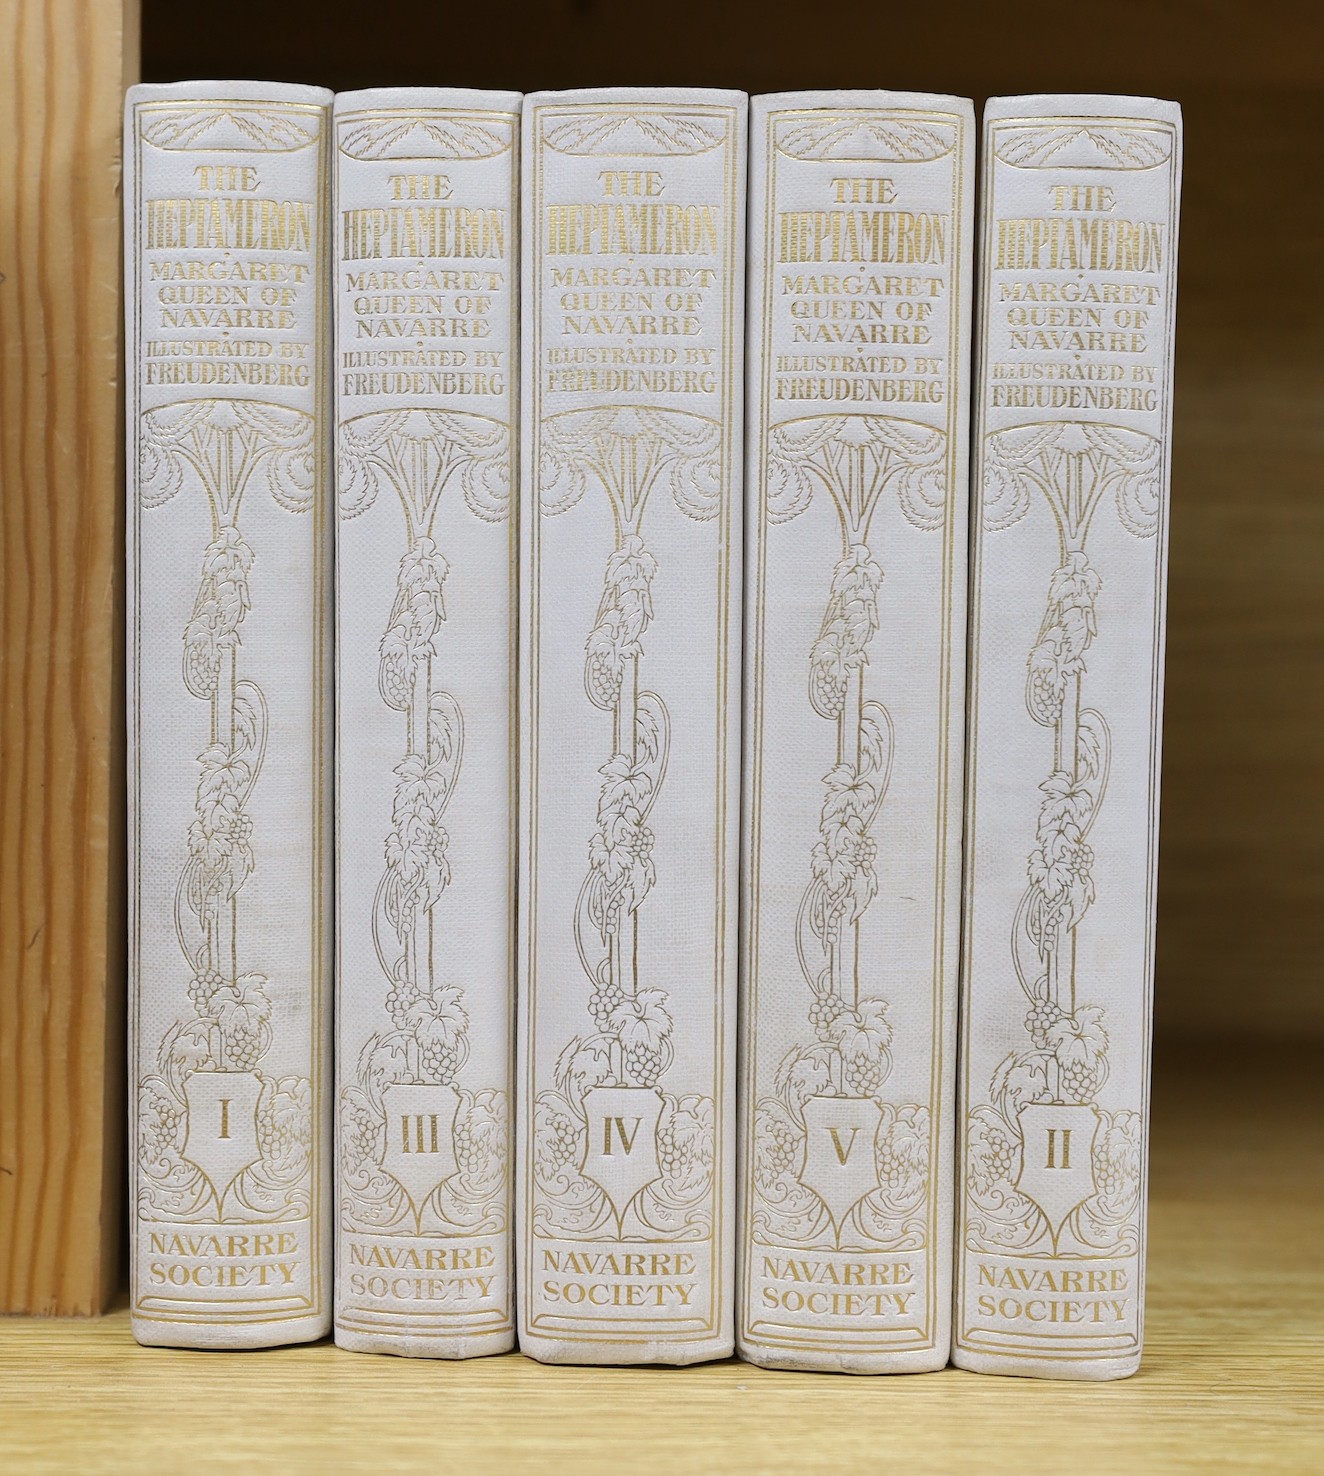 Marguerite d’Angouleme - The Heptameron, or Tales and Novels, illustrated with 73 engravings by S.Freudenberg, 5 vols, 8vo, original cloth gilt, The Navarre Society, London, 1922